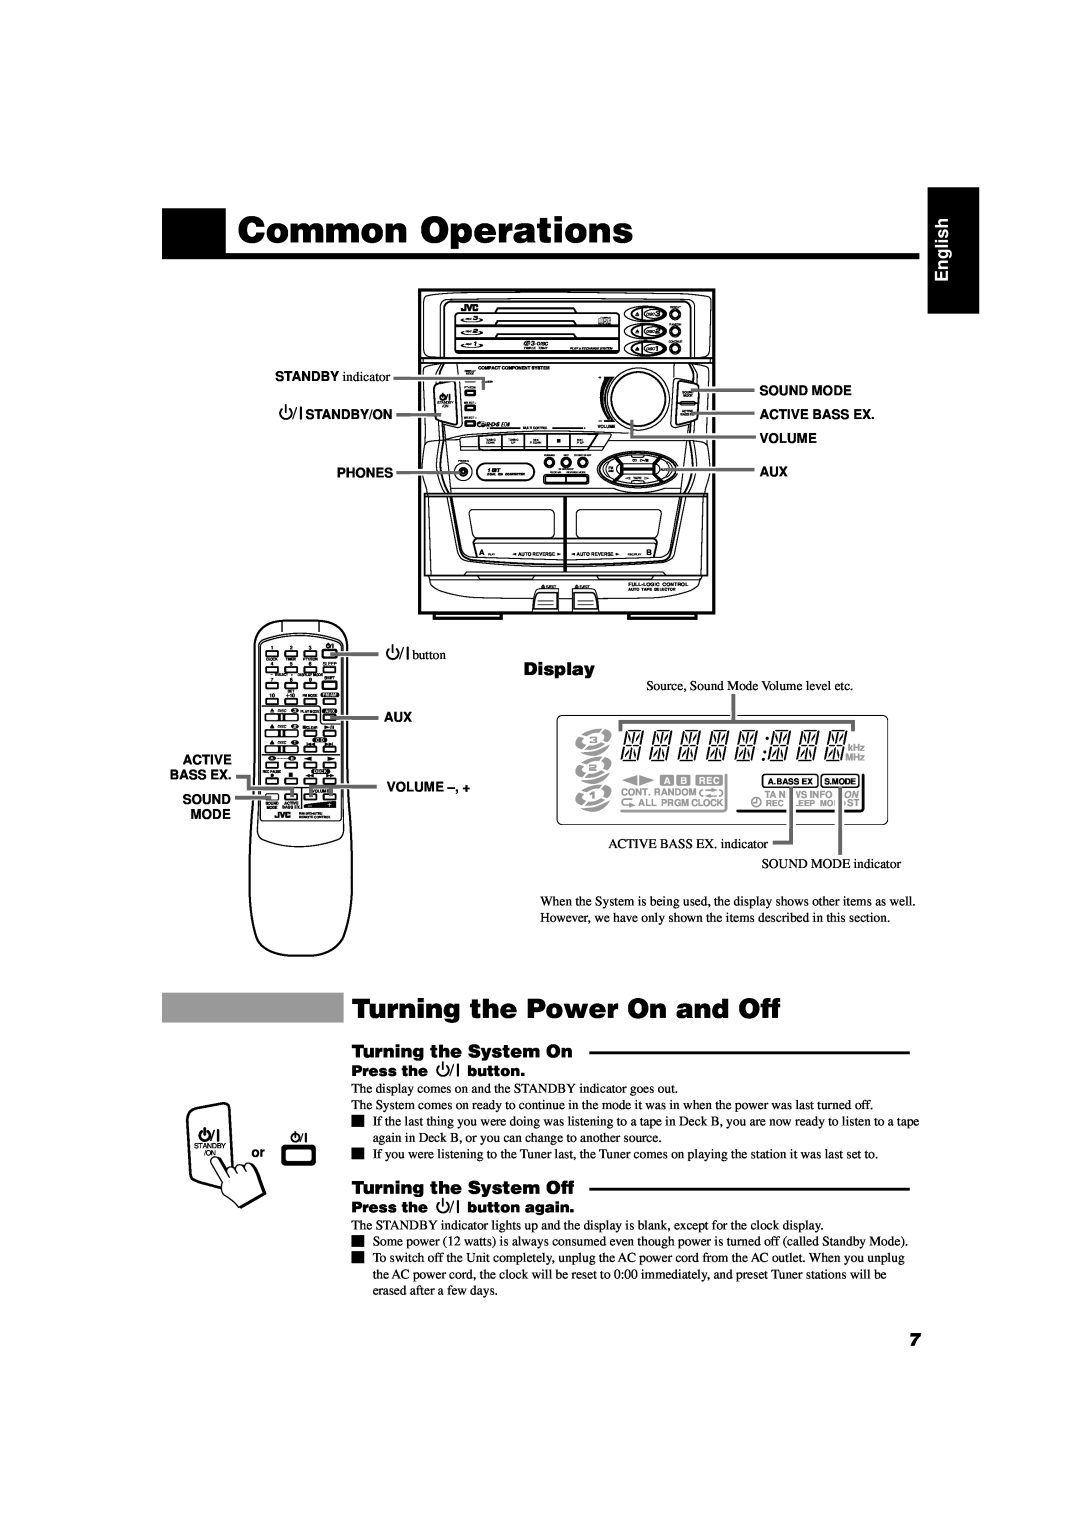 JVC CA-D451TR Common Operations, Turning the Power On and Off, Display, Turning the System On, Turning the System Off 